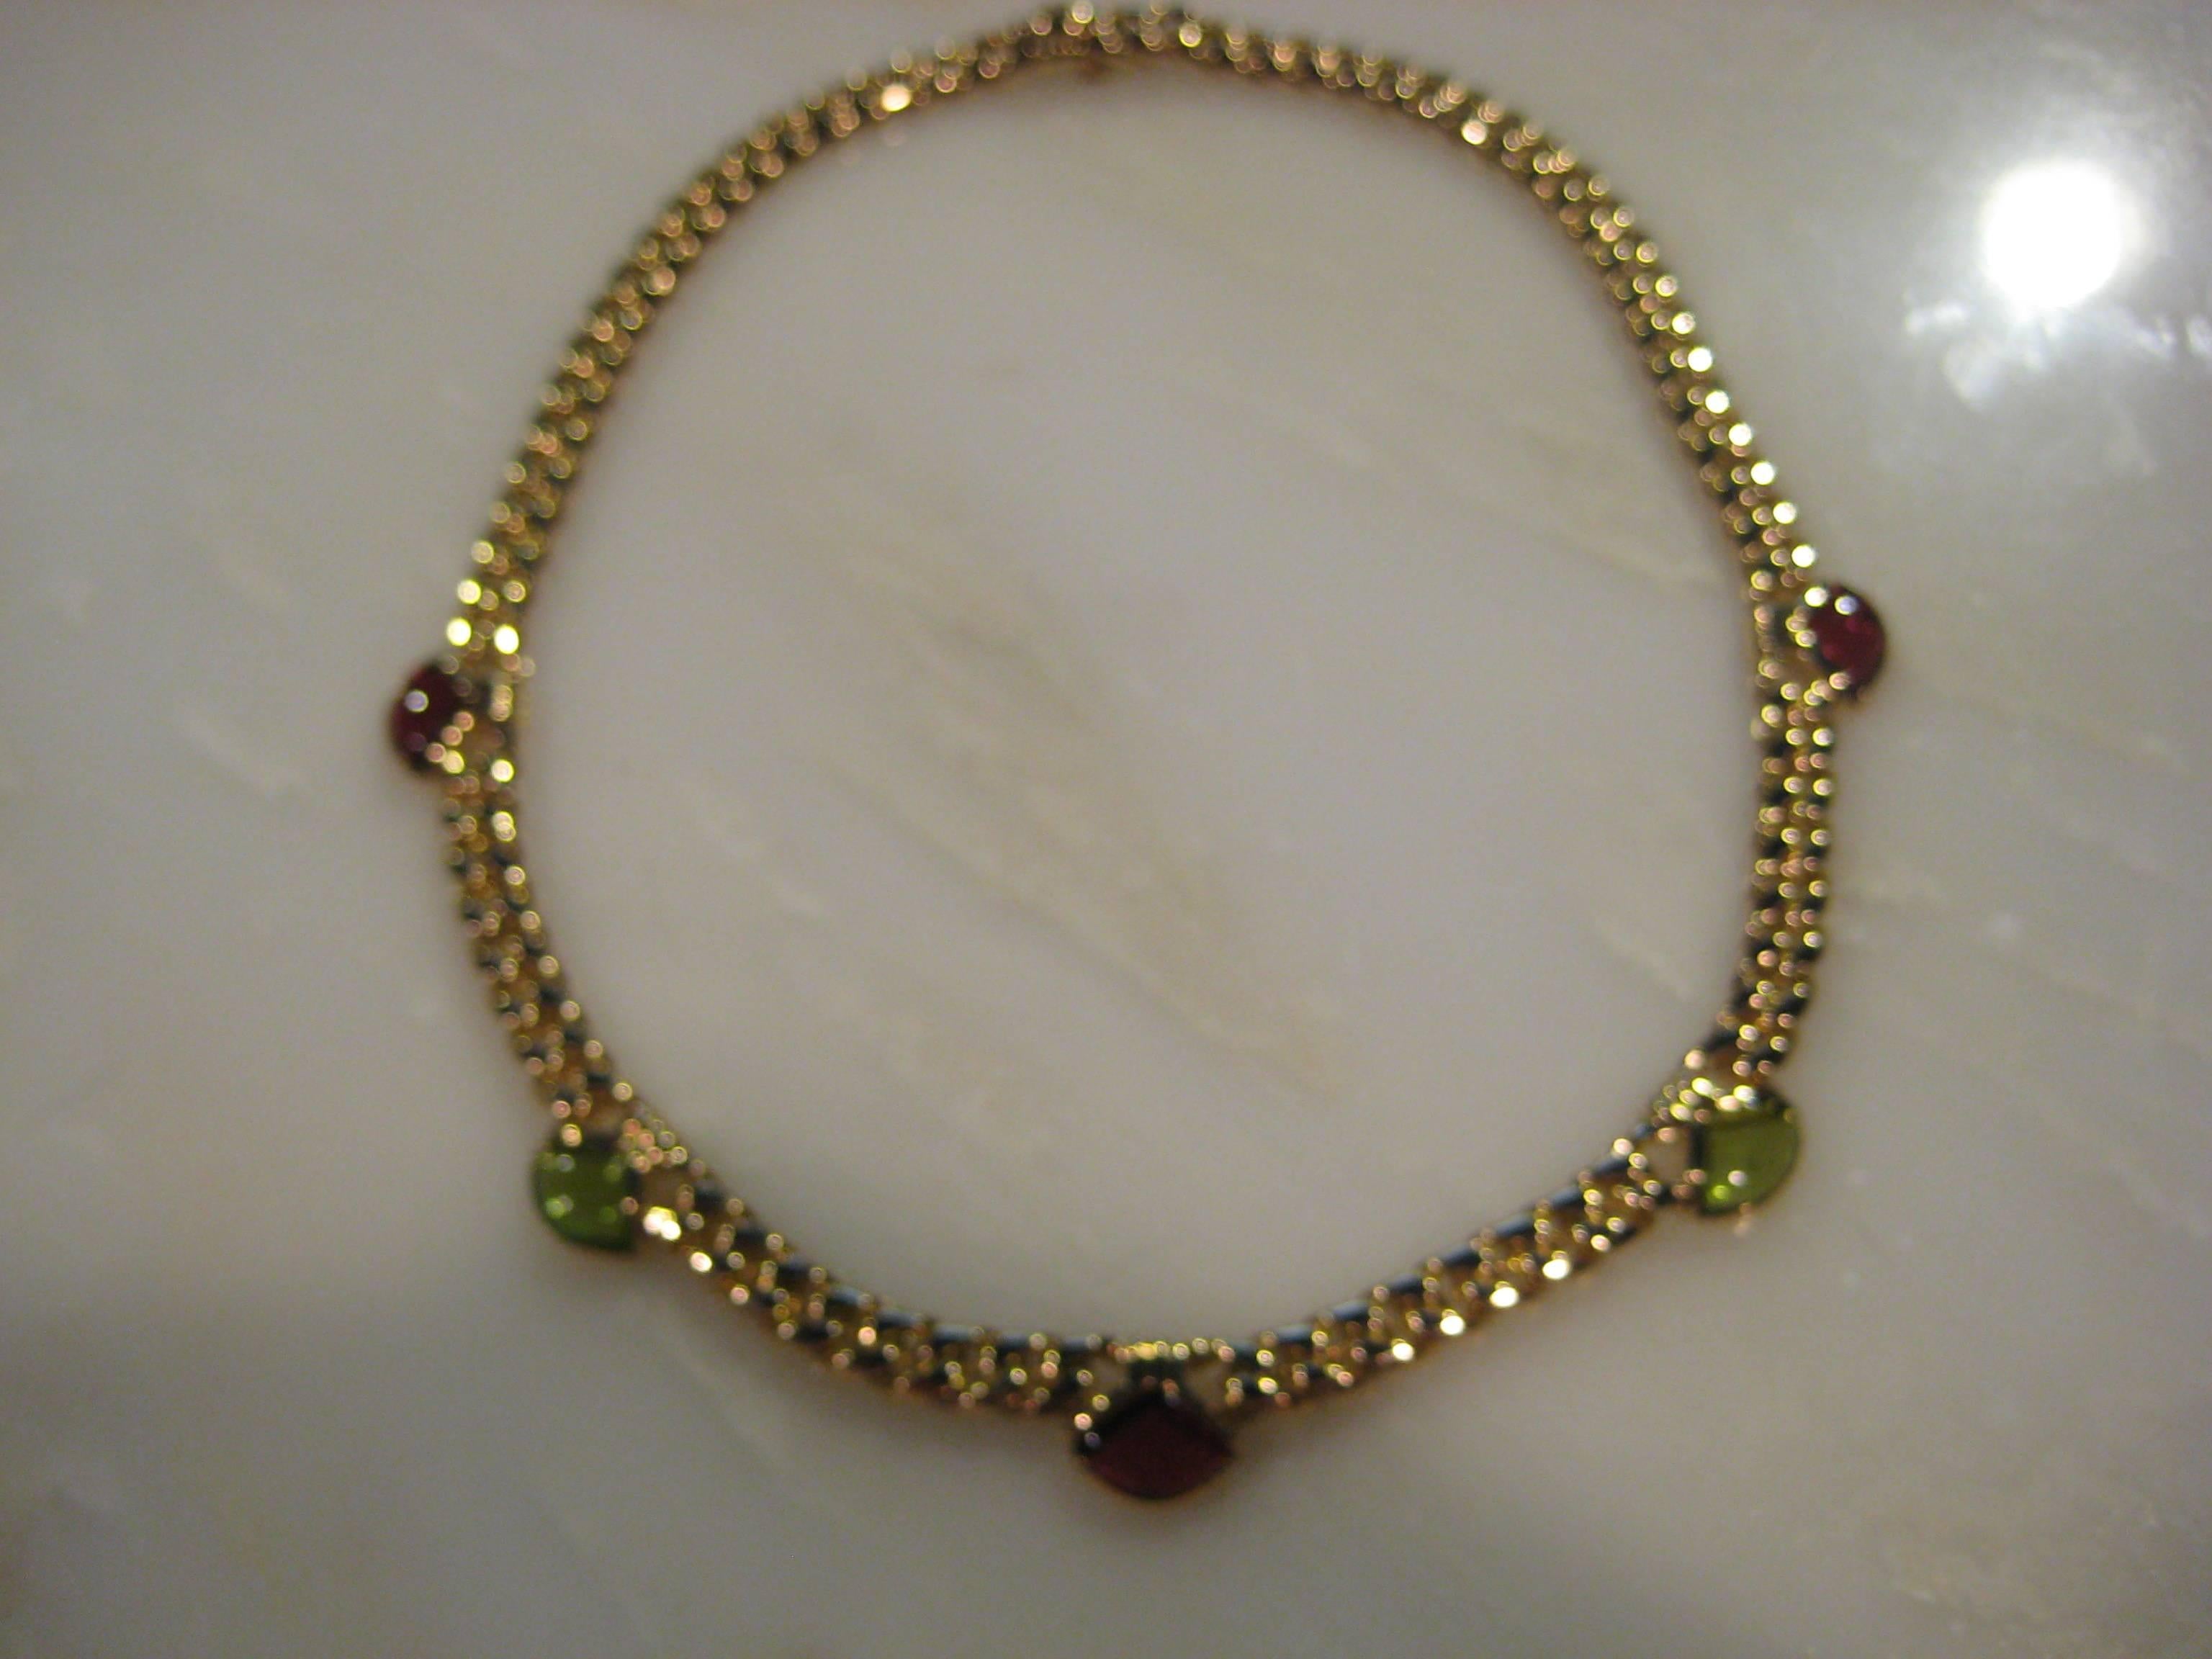 Bvlgari Bulgari 18KT yellow gold tourmaline link necklace. Necklace weighs 90.00 grams. Necklace is 16 inches in length and it is 1/2 of an inch at the width at the widest point were the tourmalines are set. 